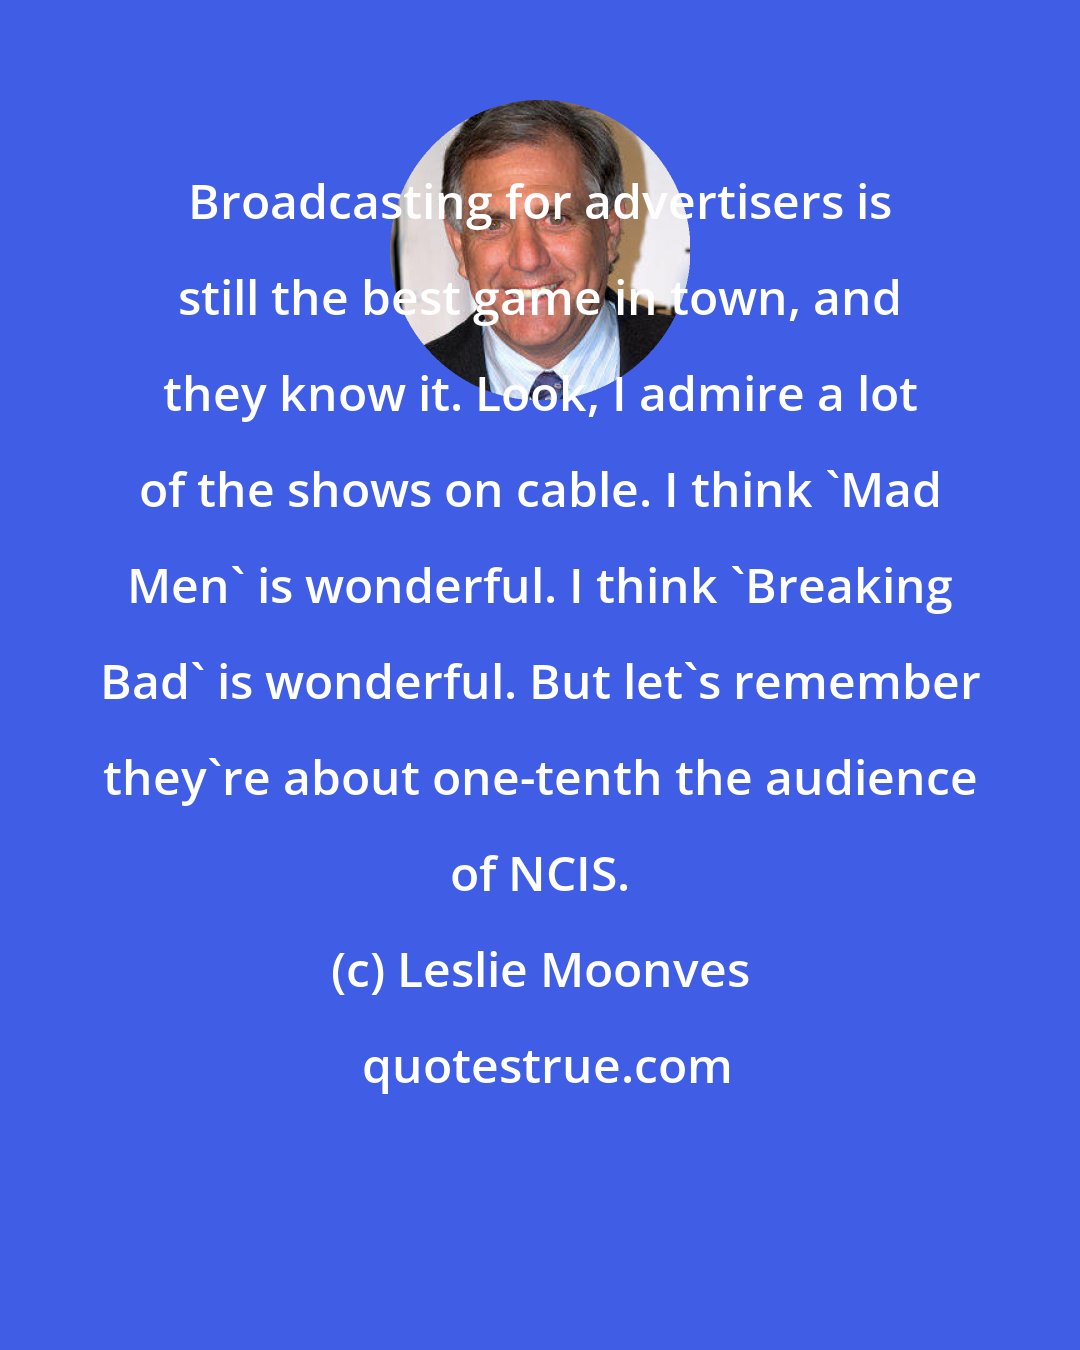 Leslie Moonves: Broadcasting for advertisers is still the best game in town, and they know it. Look, I admire a lot of the shows on cable. I think 'Mad Men' is wonderful. I think 'Breaking Bad' is wonderful. But let's remember they're about one-tenth the audience of NCIS.